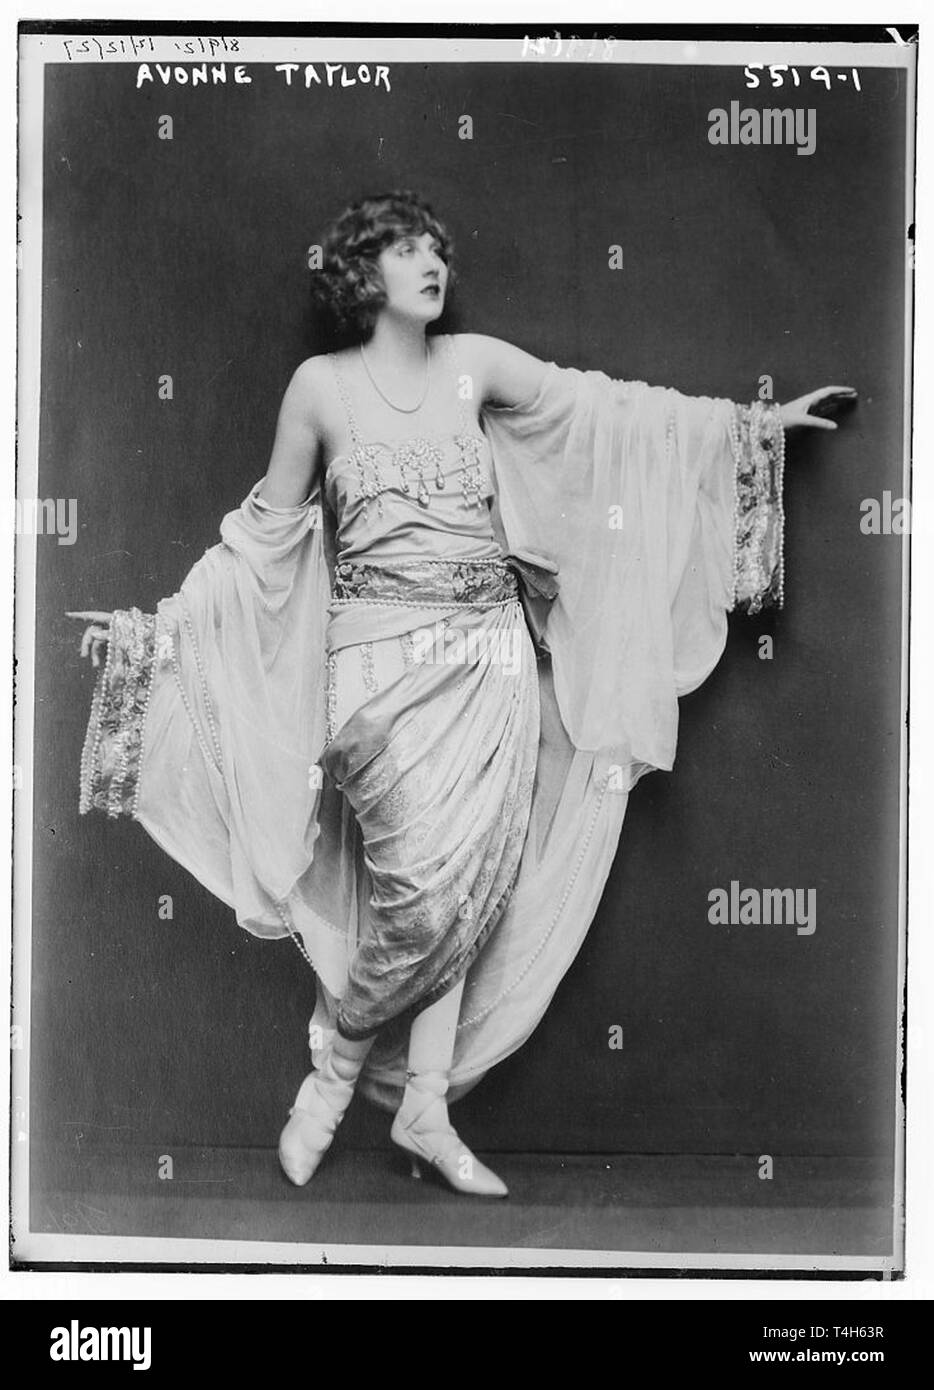 vintage photo of a woman in costume Stock Photo